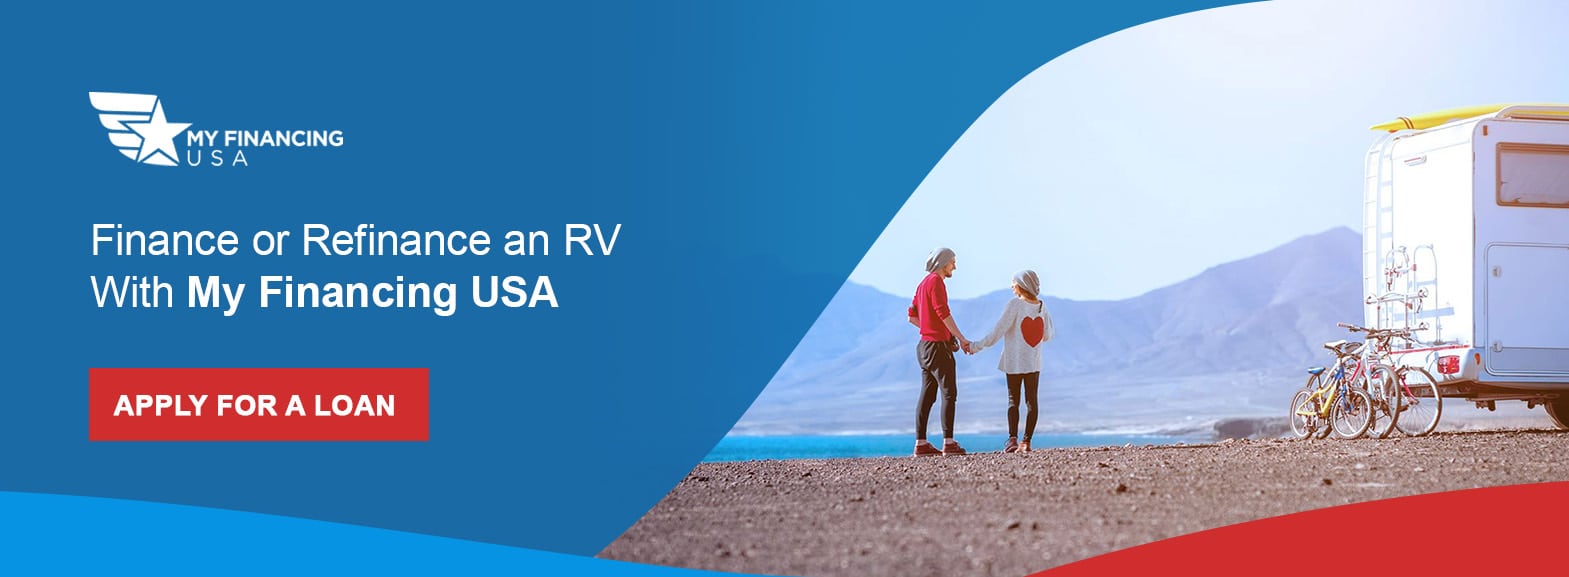 Finance or Refinance an RV With My Financing USA. Apply for a loan!